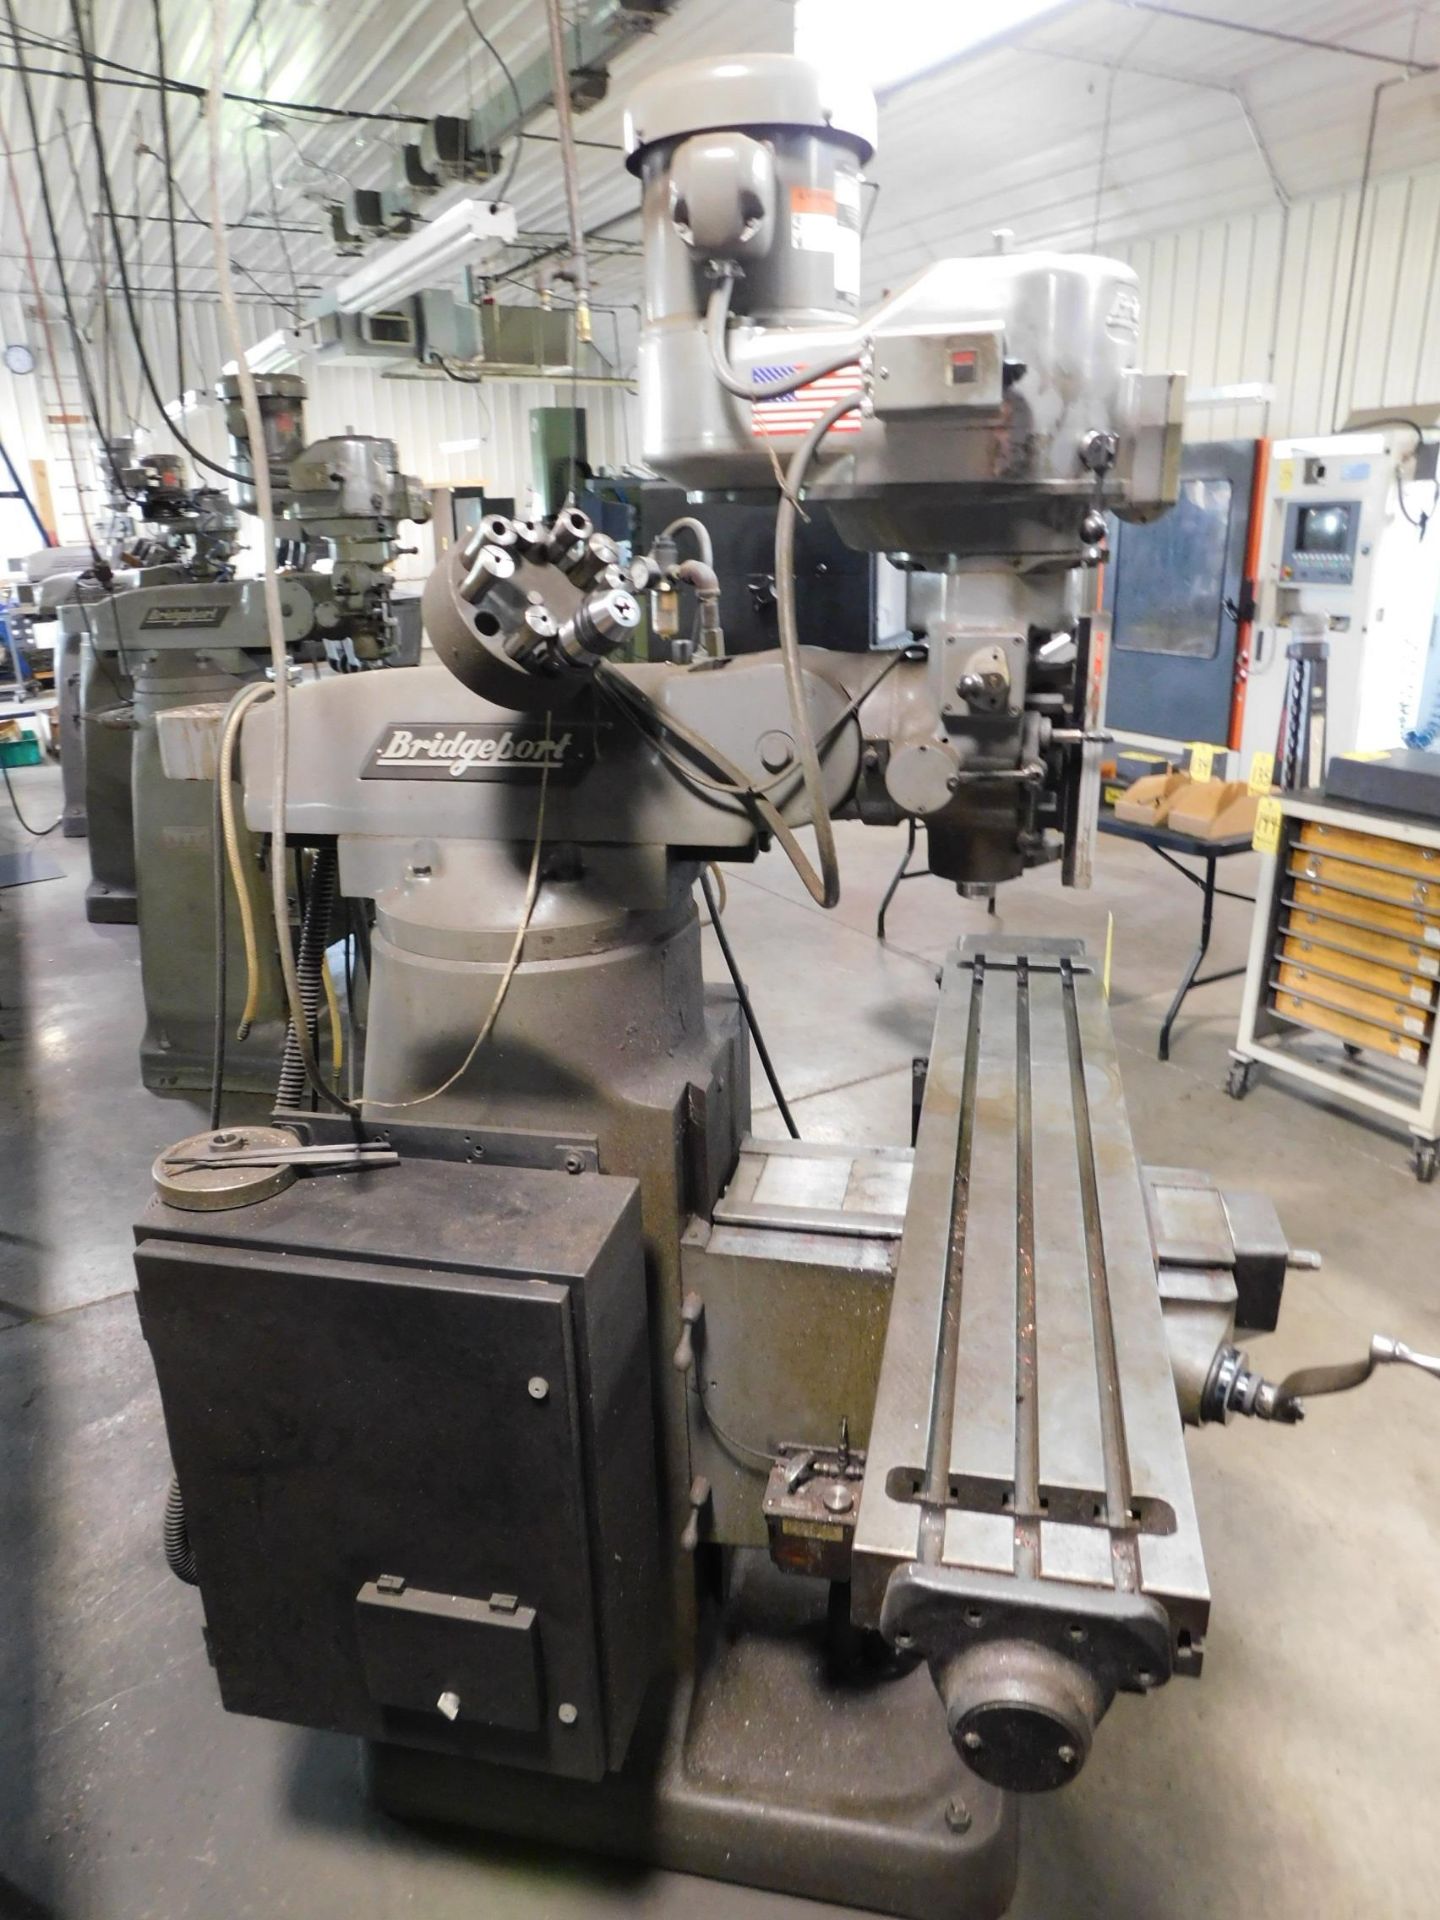 Bridgeport 2H.P. 2-Axis CNC Vertical Mill SNBR268079, w/Amilam Series 1100 CNC Control, 9"X48" - Image 7 of 12